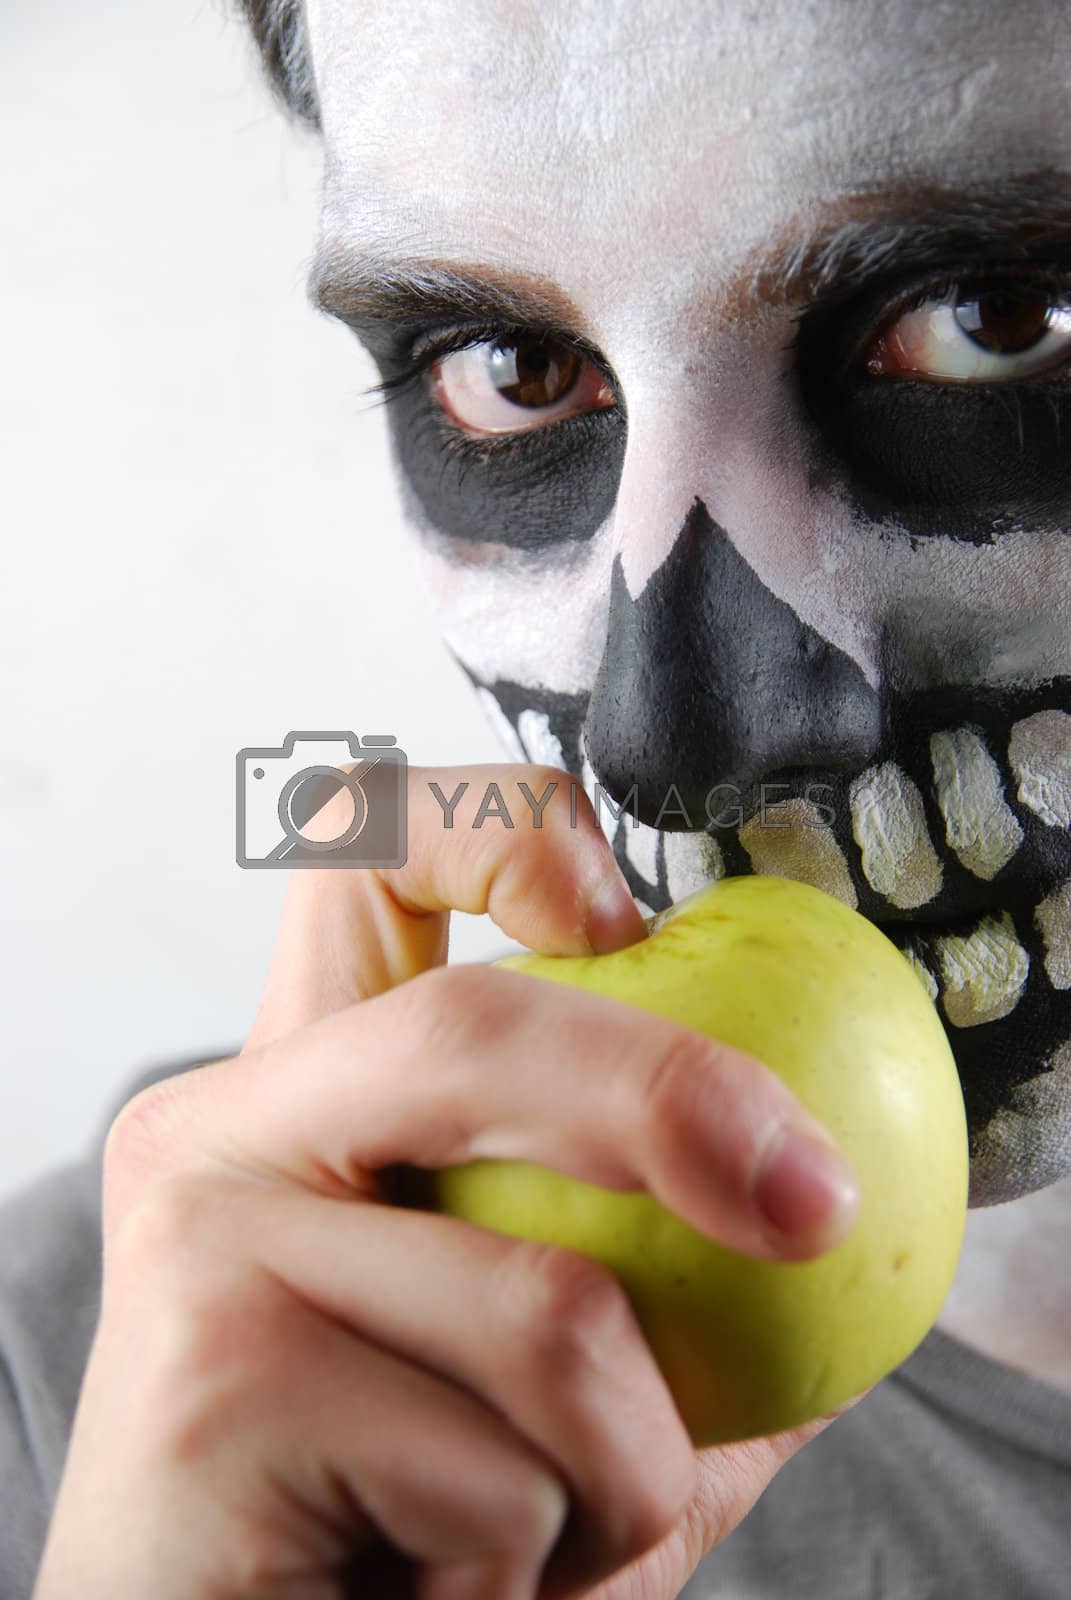 Royalty free image of Don't eat just apples (skeleton guy concept) by luissantos84